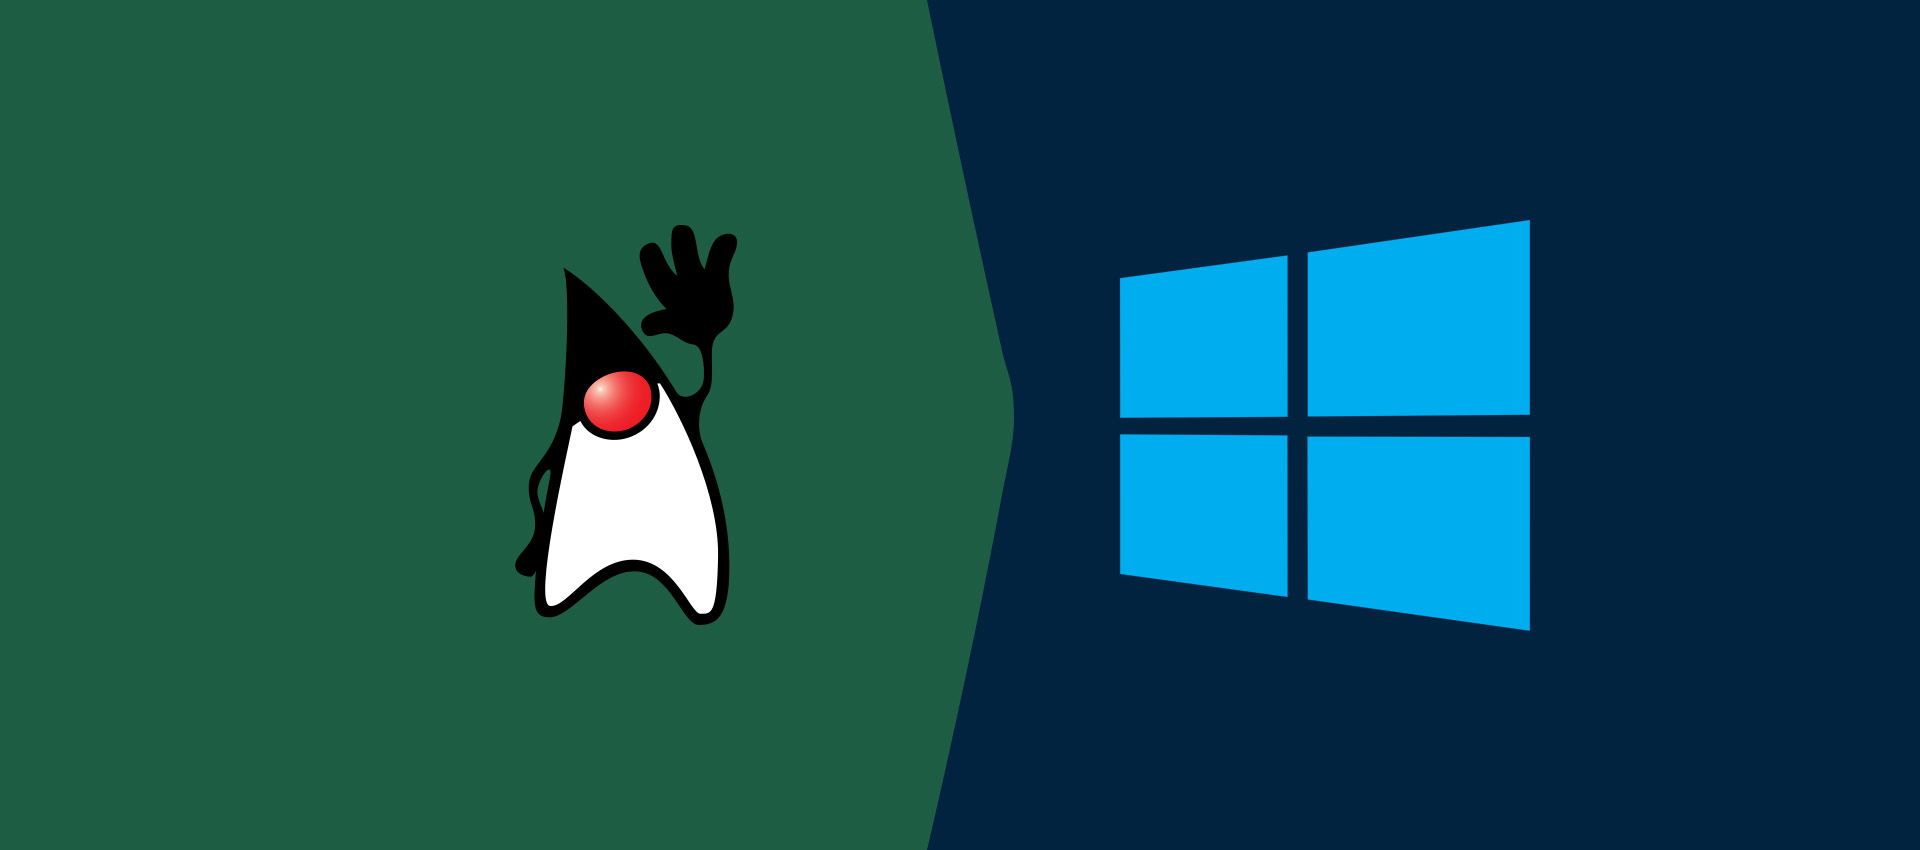 How To Install OpenJDK 15 On Windows